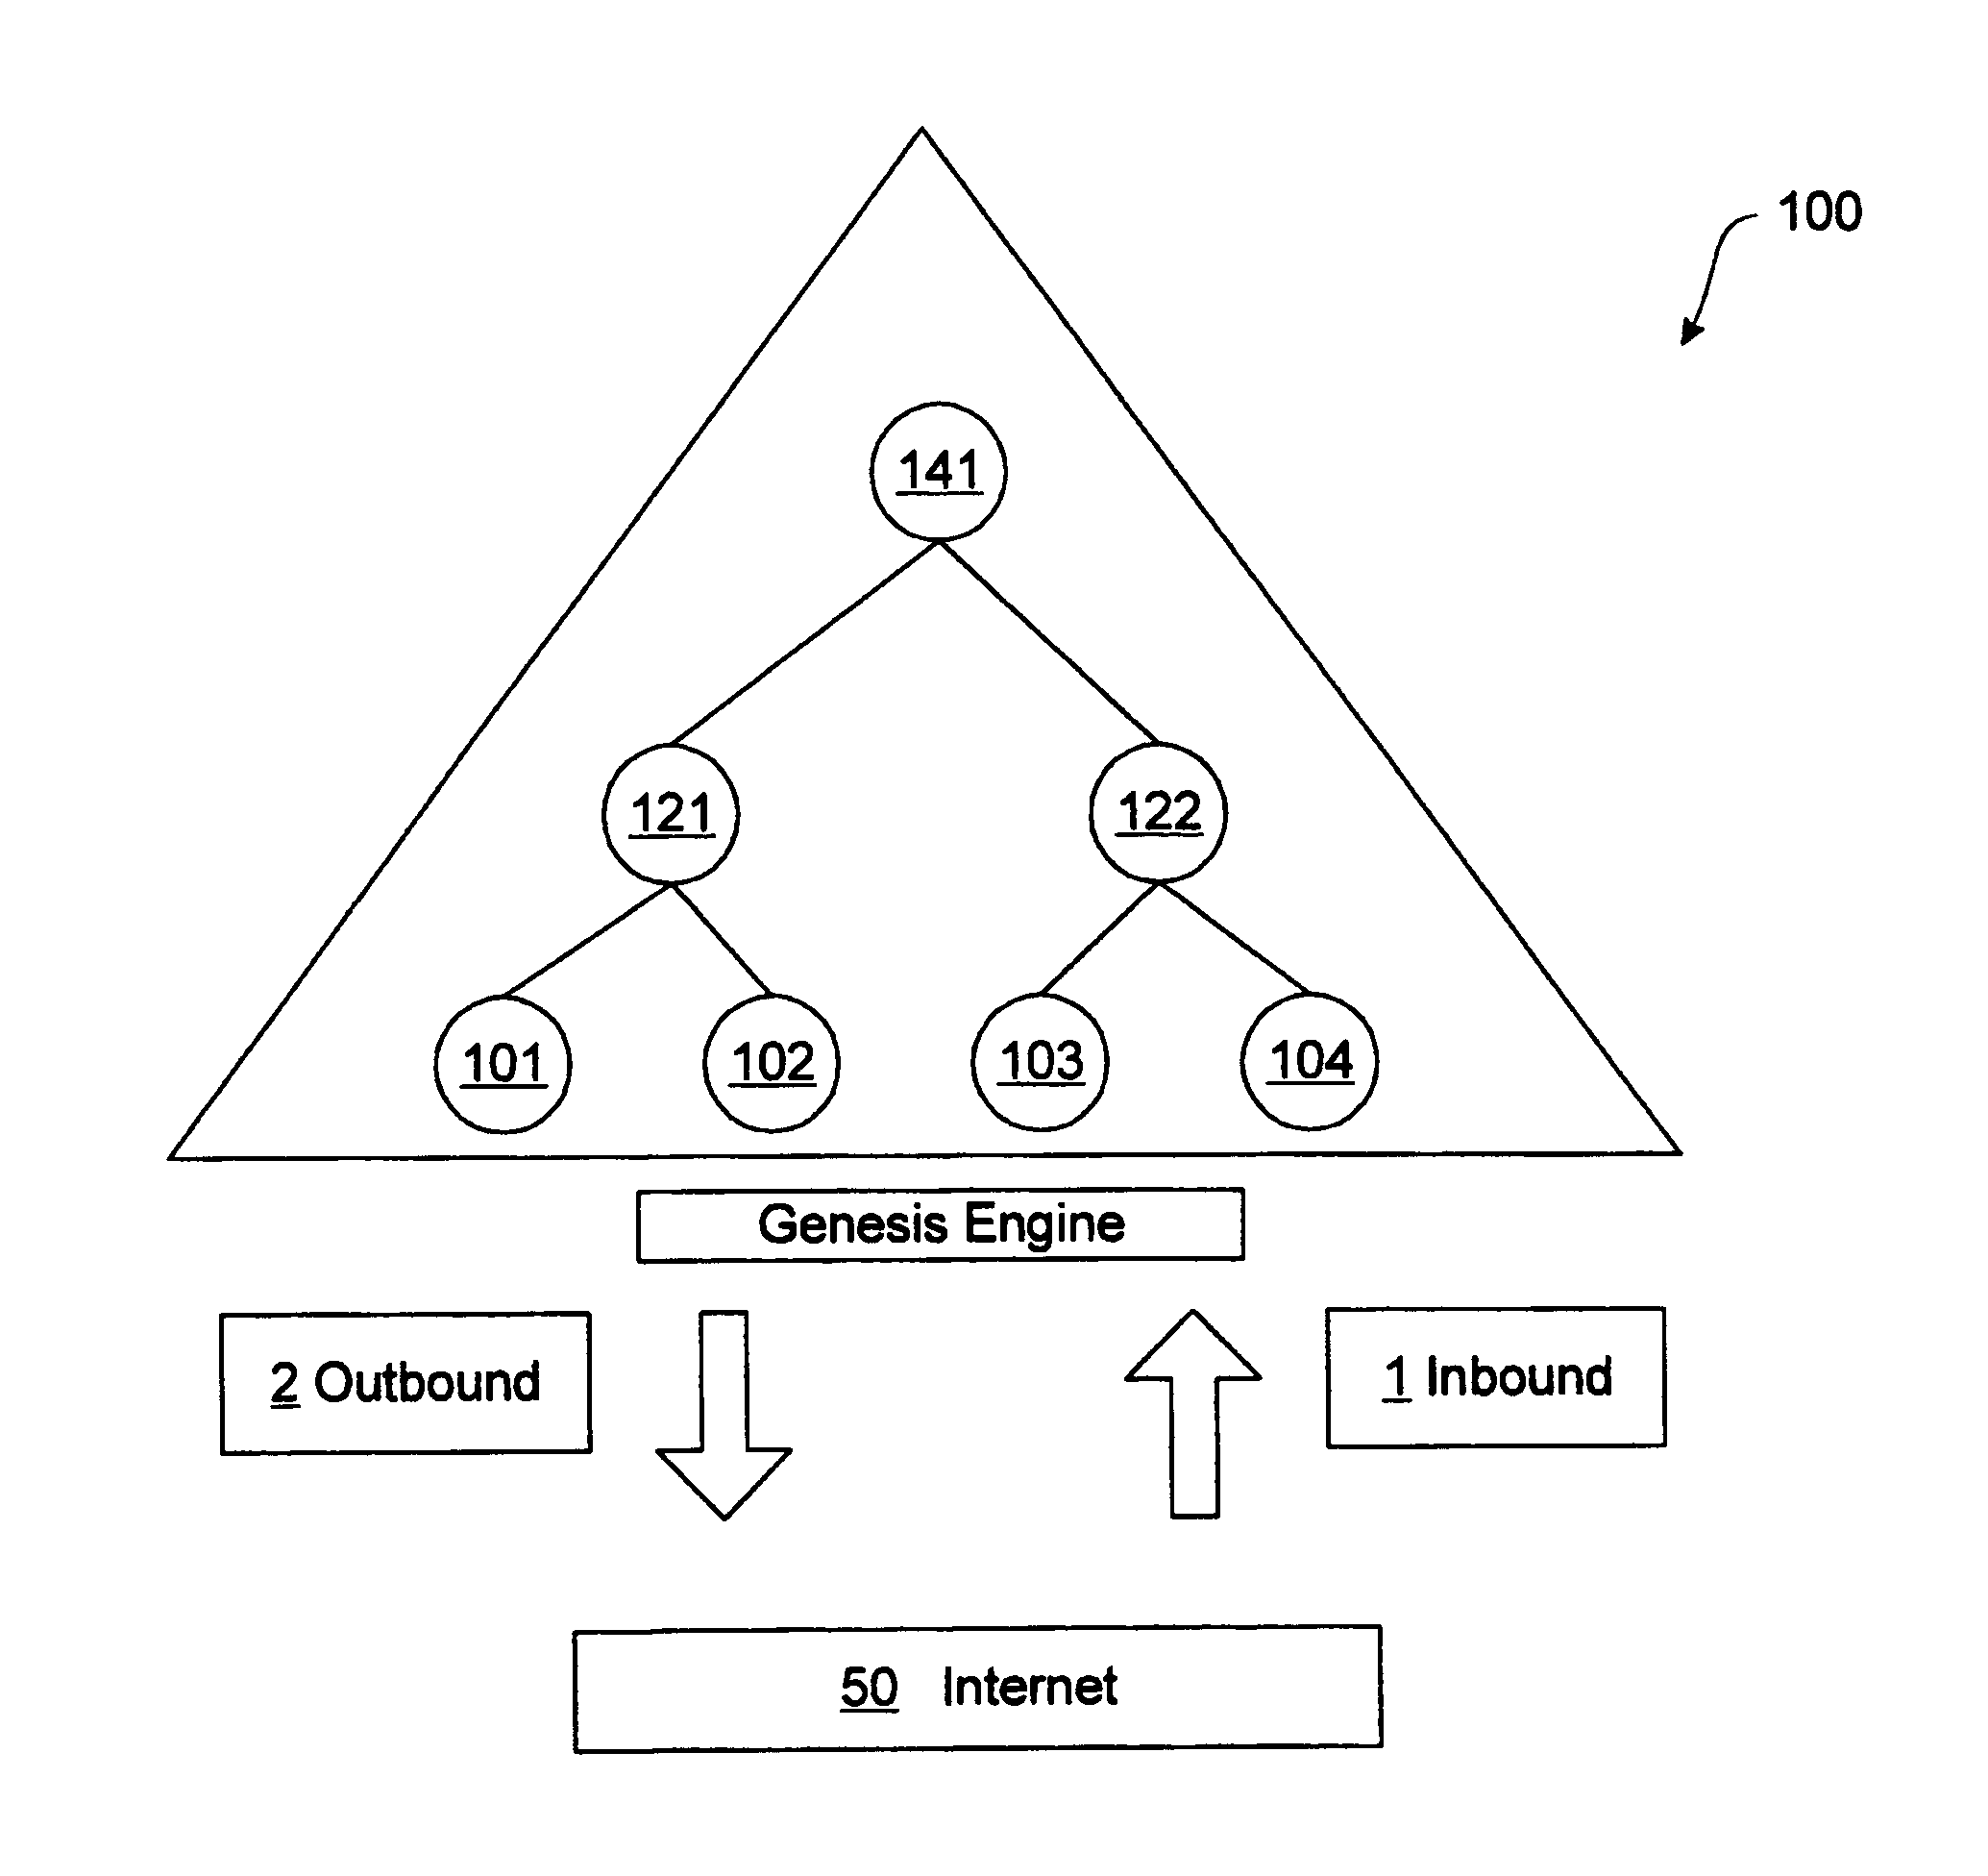 Parallel computer network and method for real time financial resource management, inventory control, and online purchasing